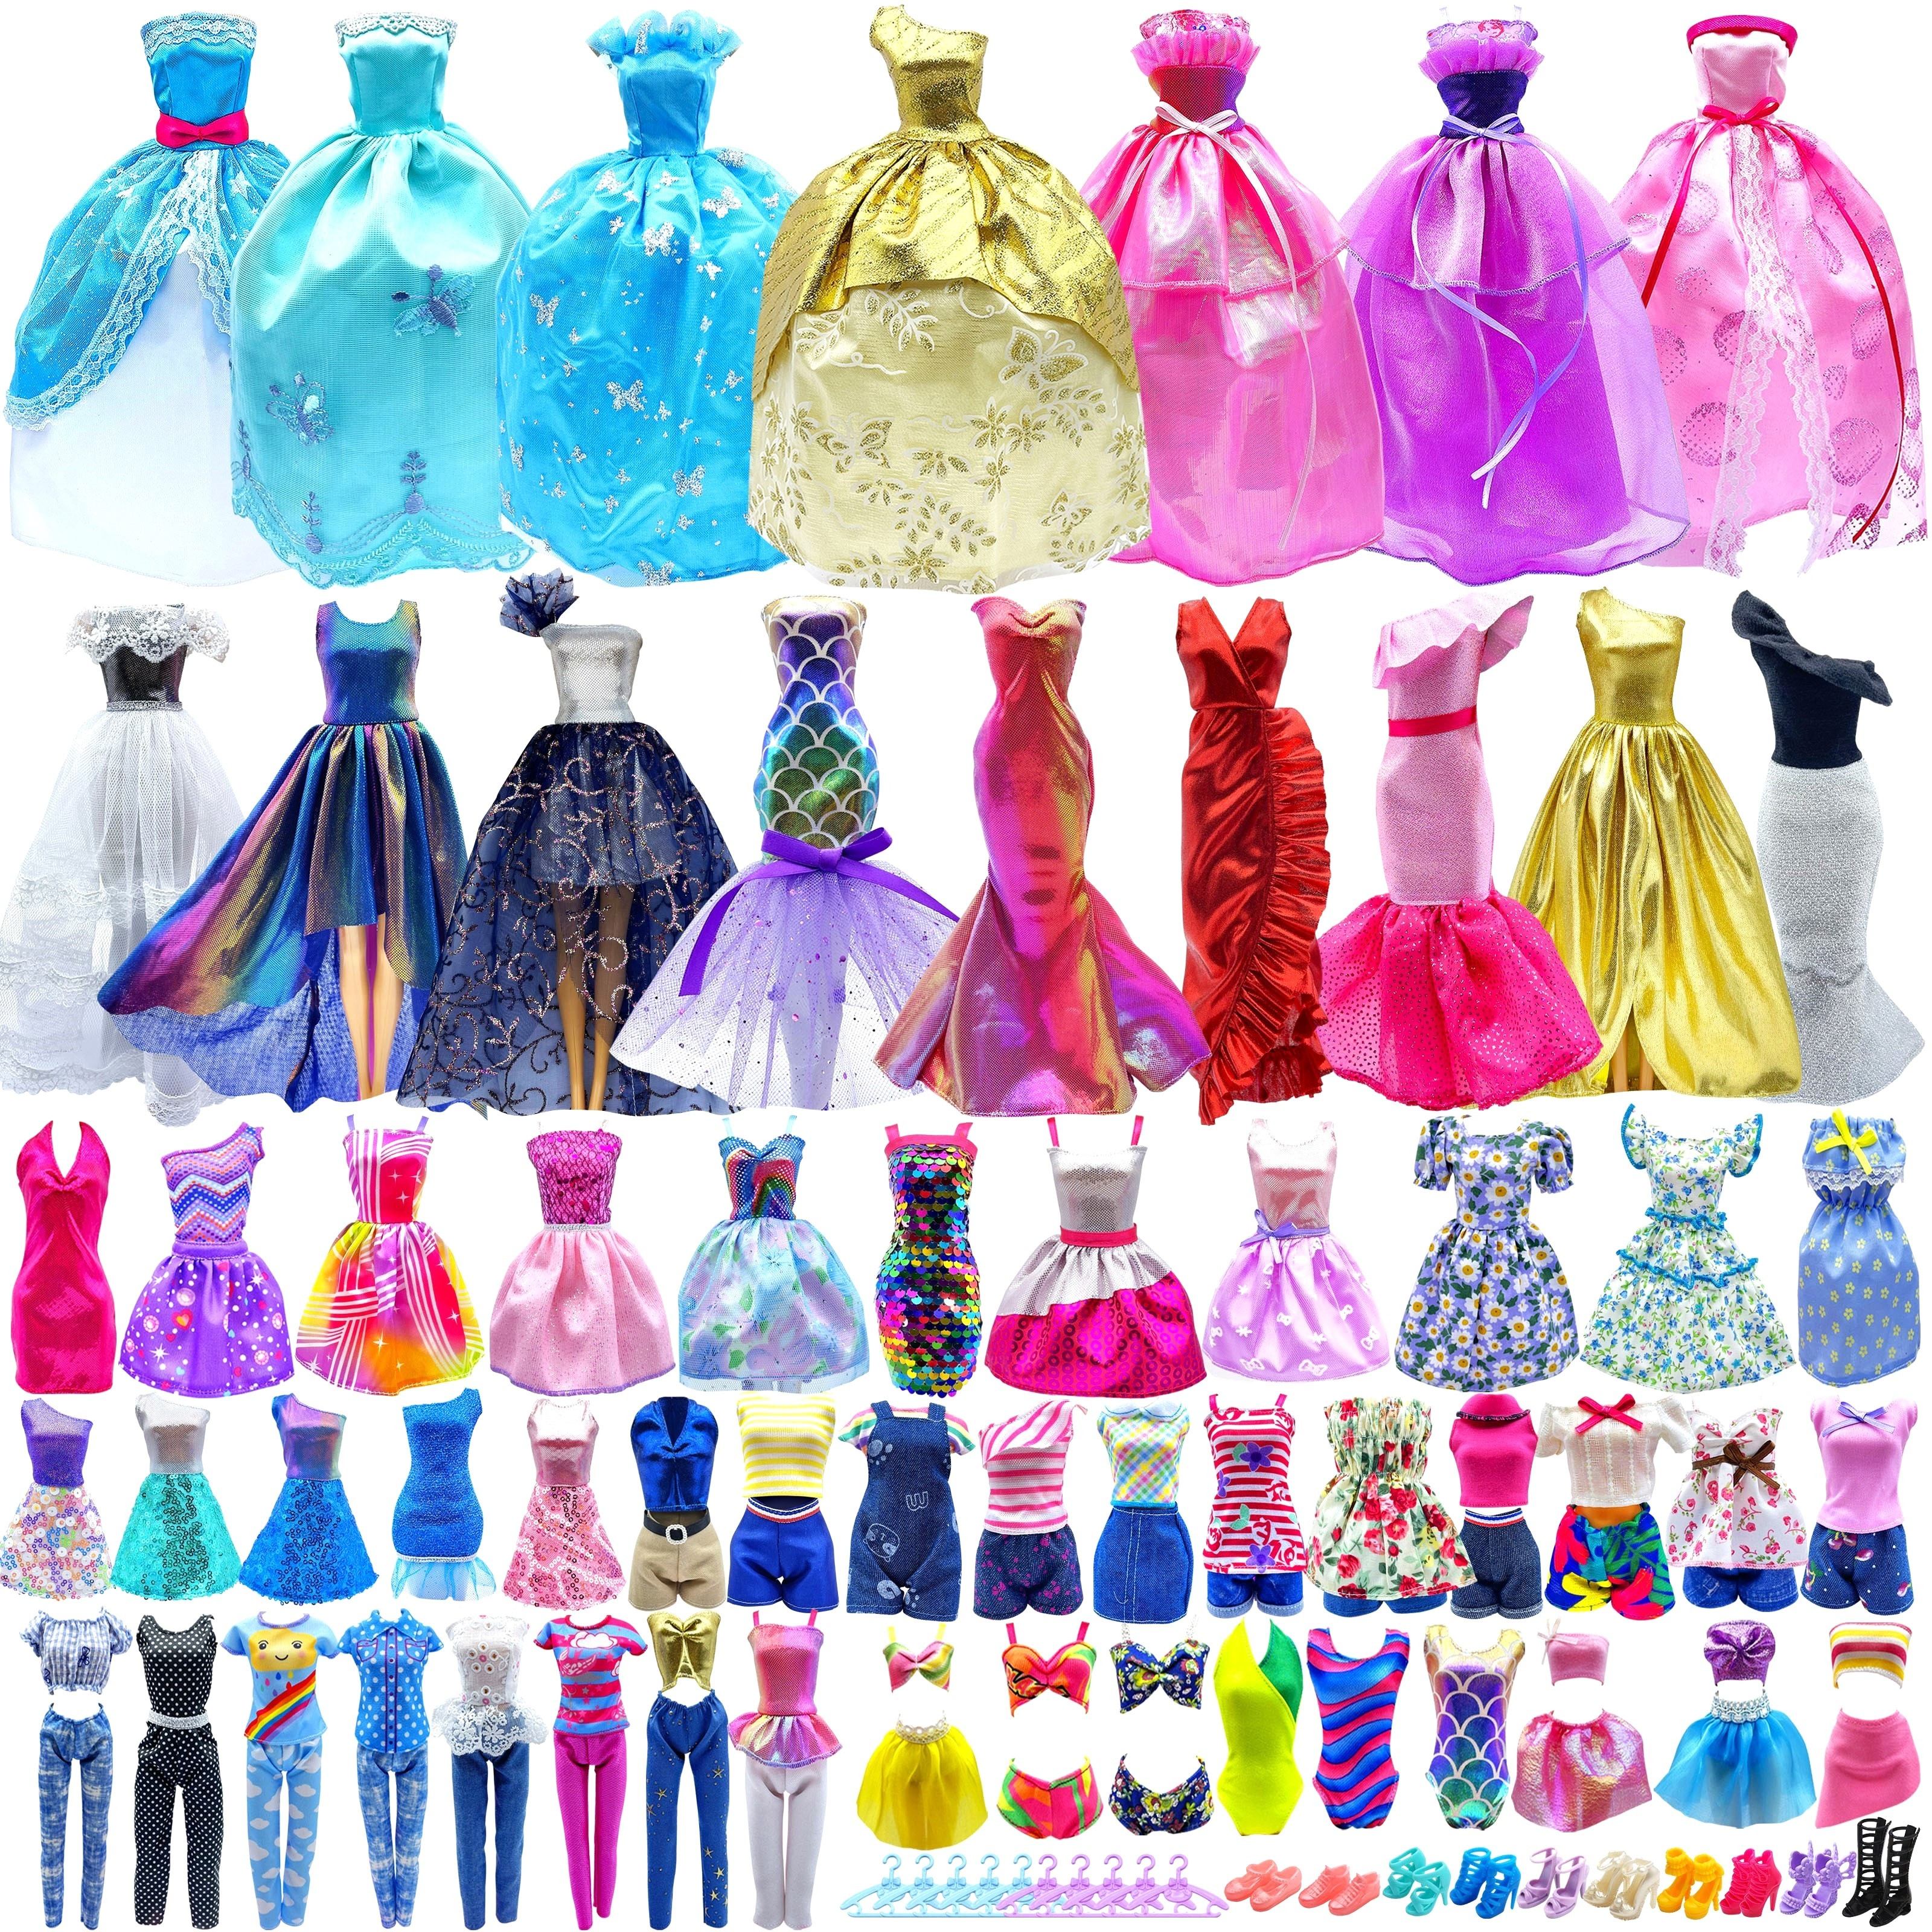 Clothing Accessories, Barbie Clothing Set, Clothes Accessories